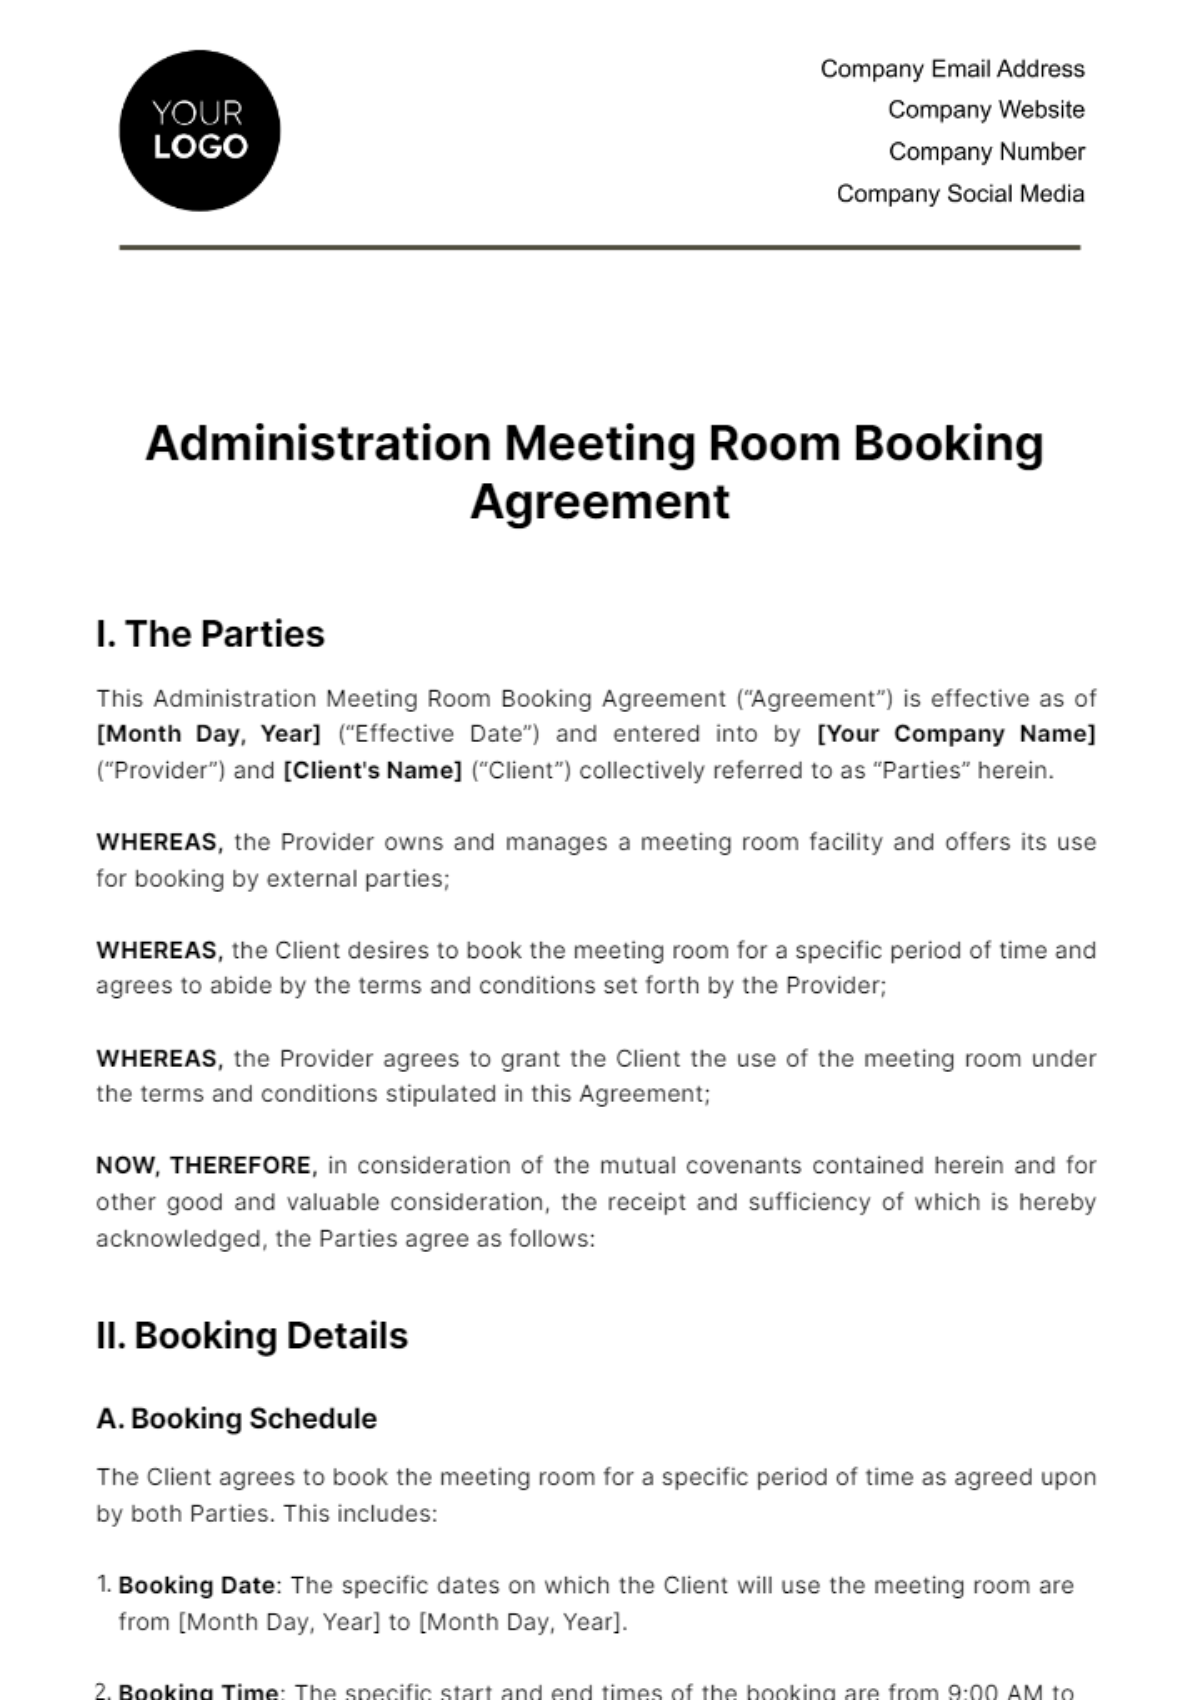 Free Administration Meeting Room Booking Agreement Template